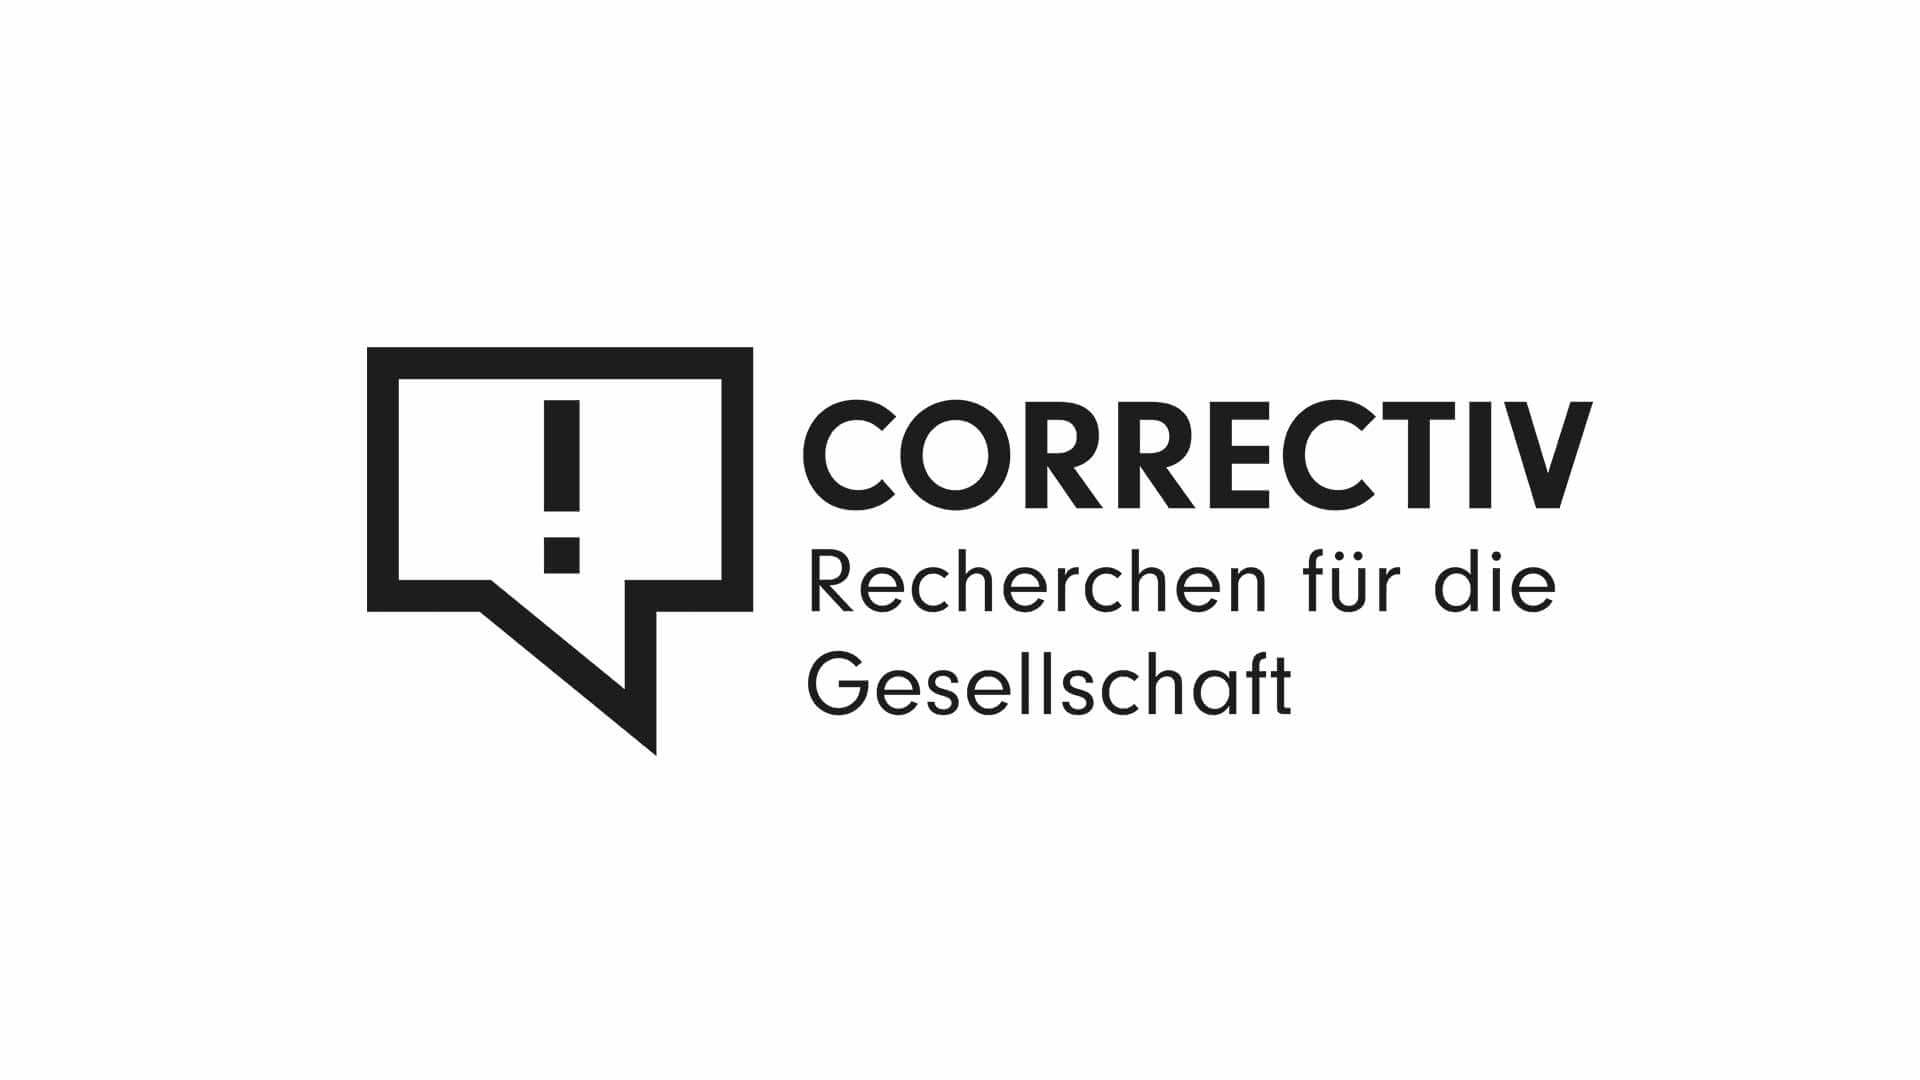 9-facts-about-correctiv